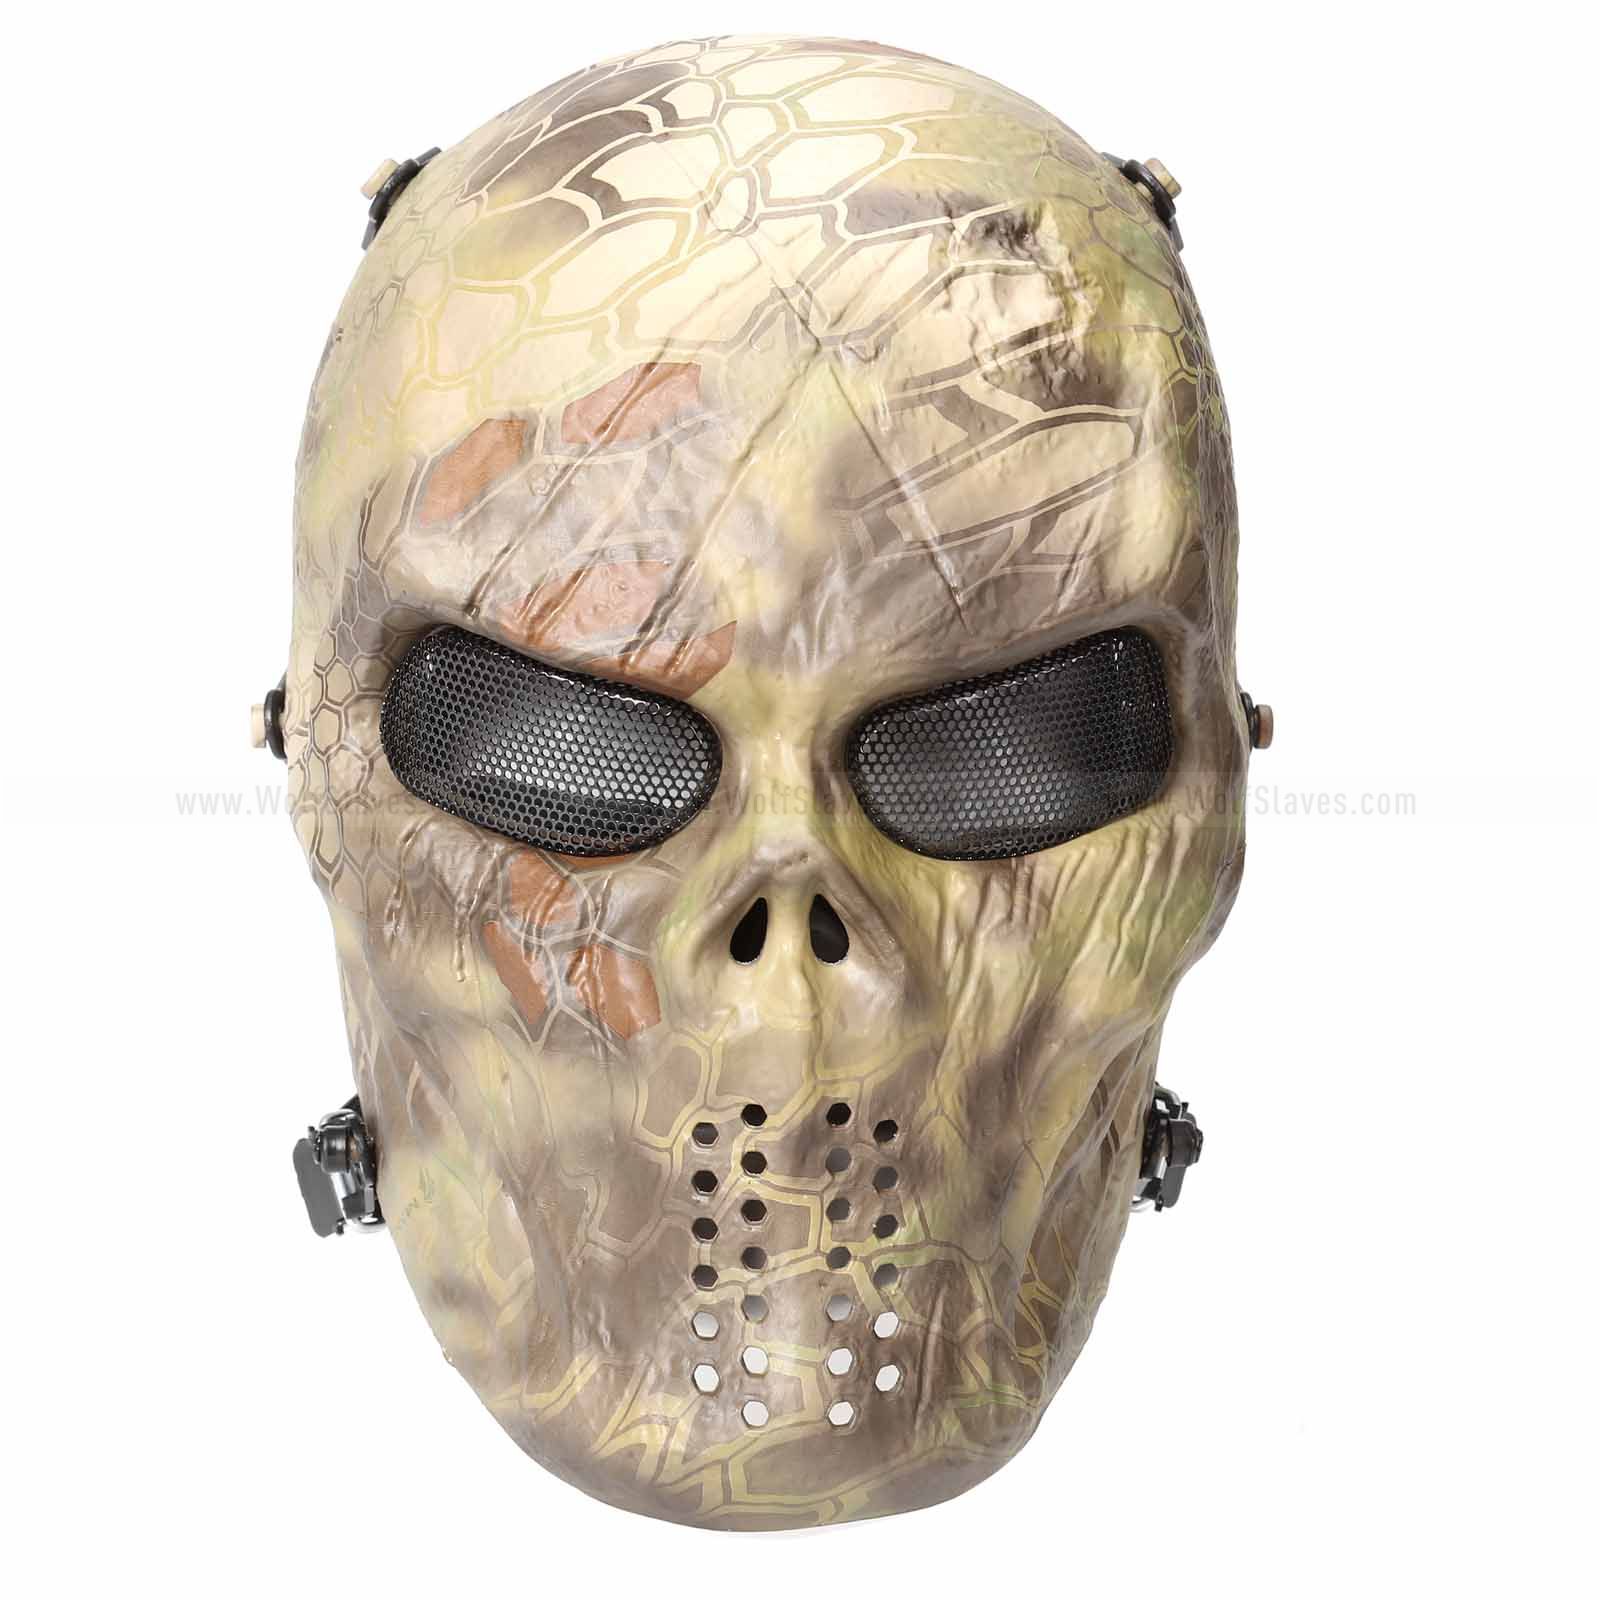 WalkingMan Tactical Mask Skull Full Face with Metal Mesh Eye Protection for sale online 